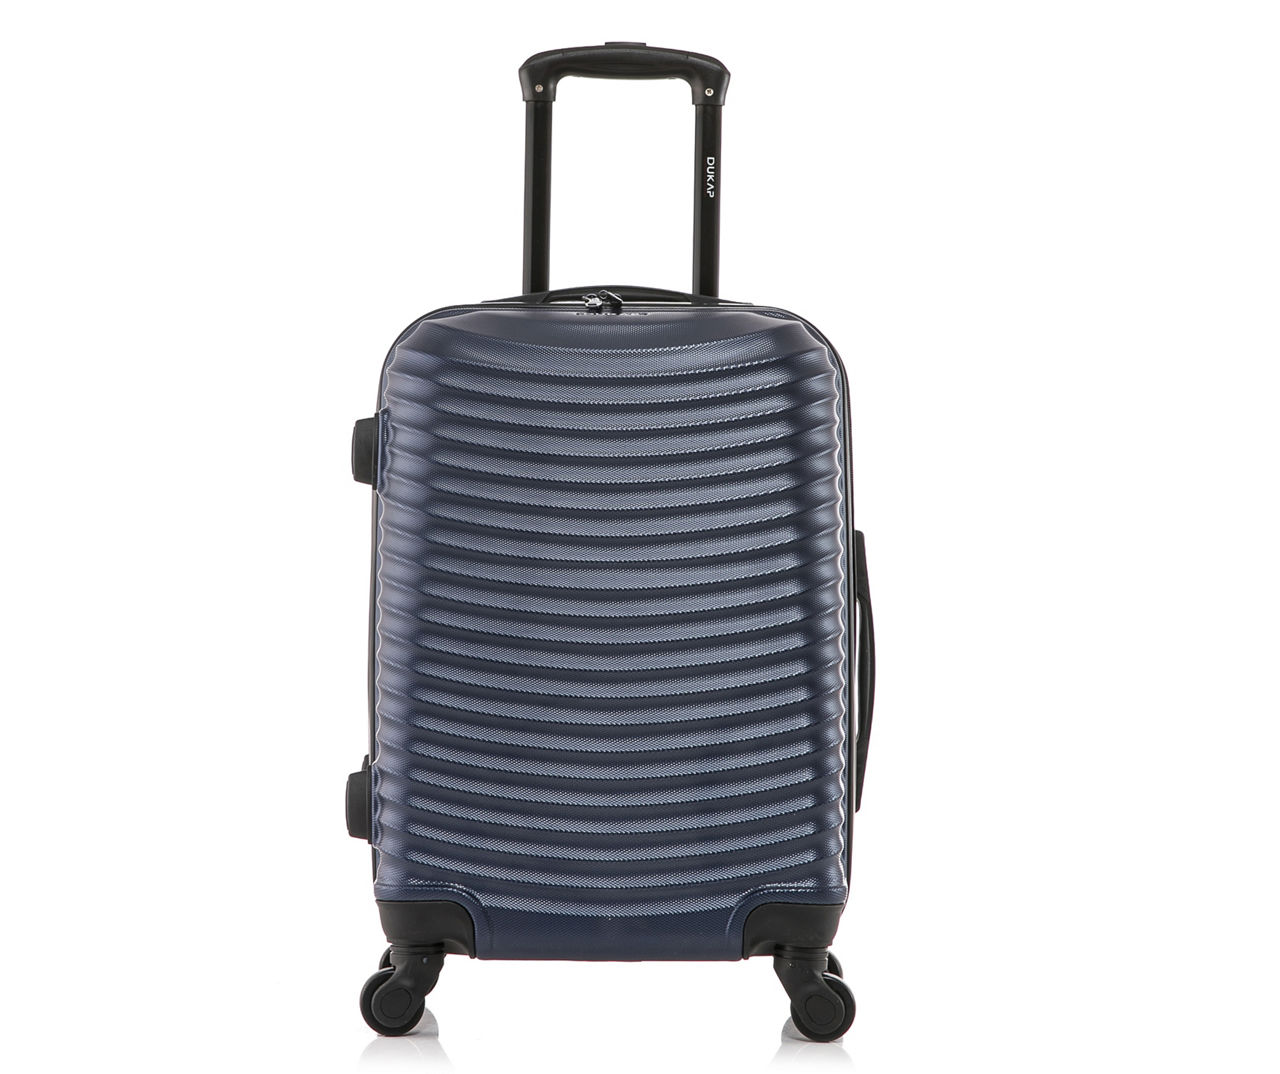 DUKAP Adly Blue 20" Curved-Ridge Hardside Spinner Carry-On Suitcase